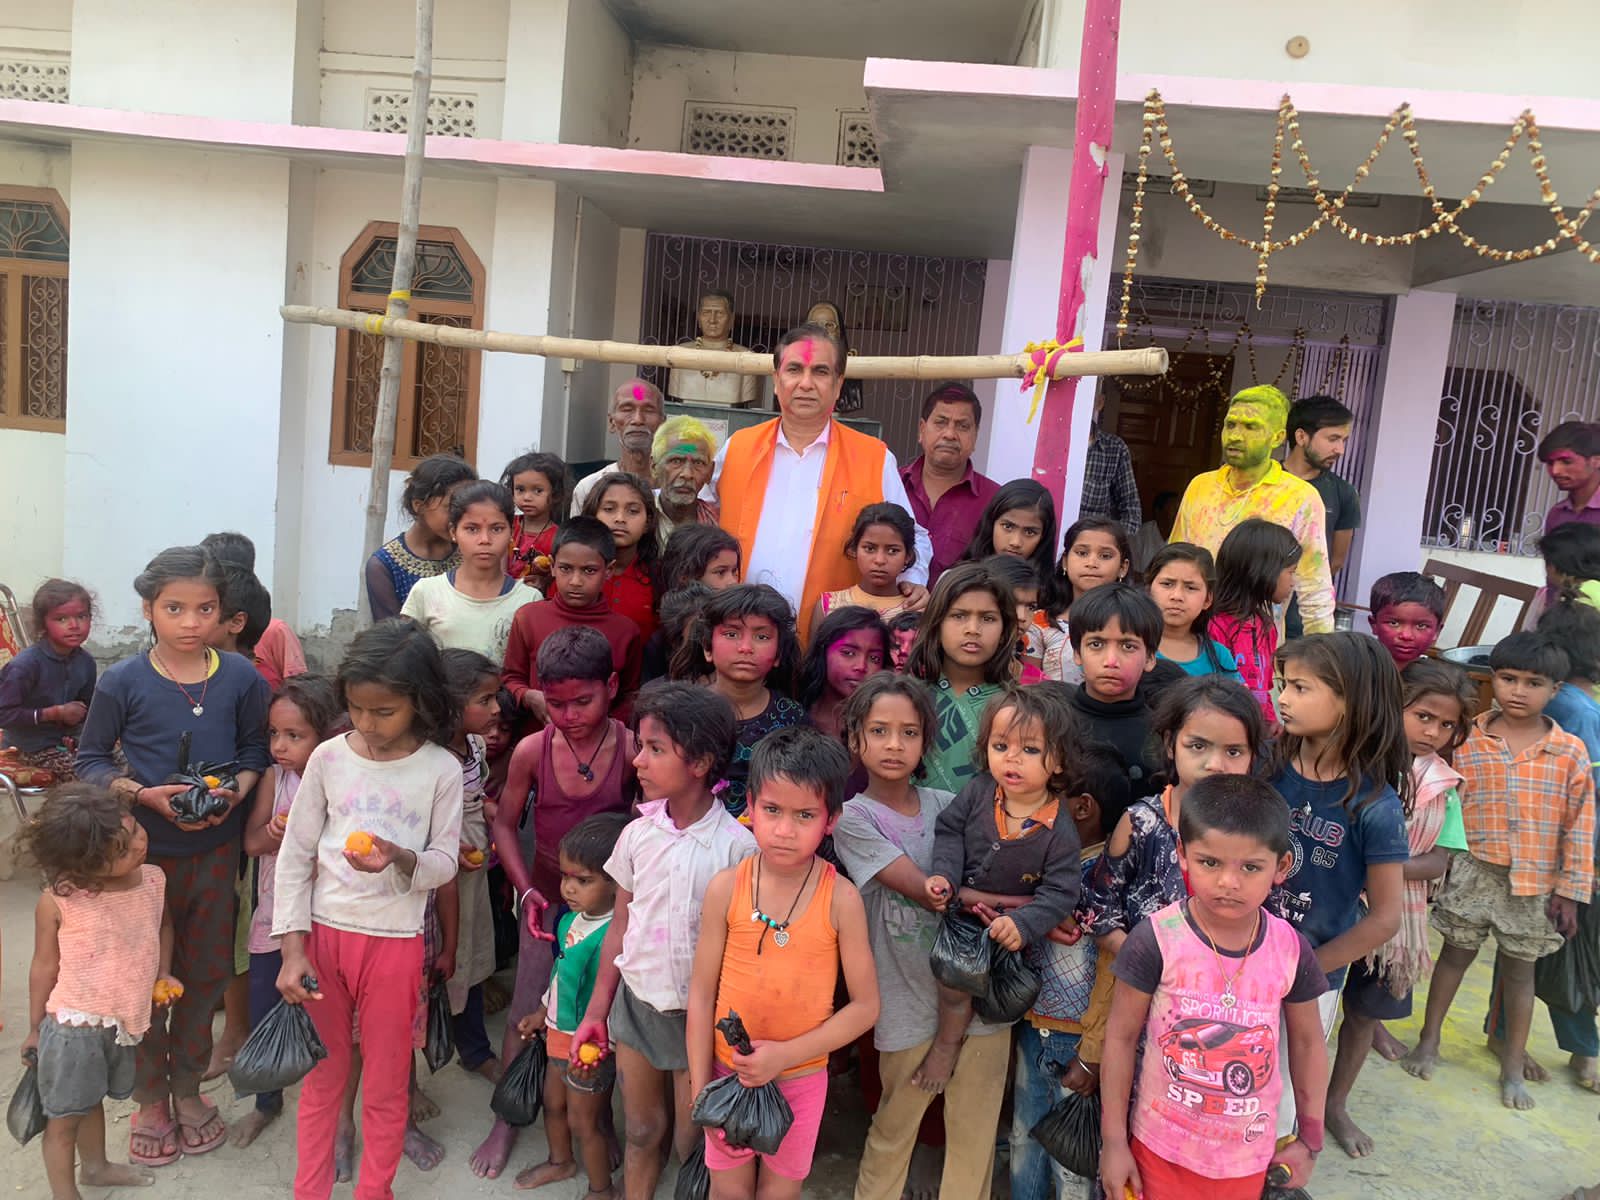 A. P. Pathak distributed grains and sweets among the children